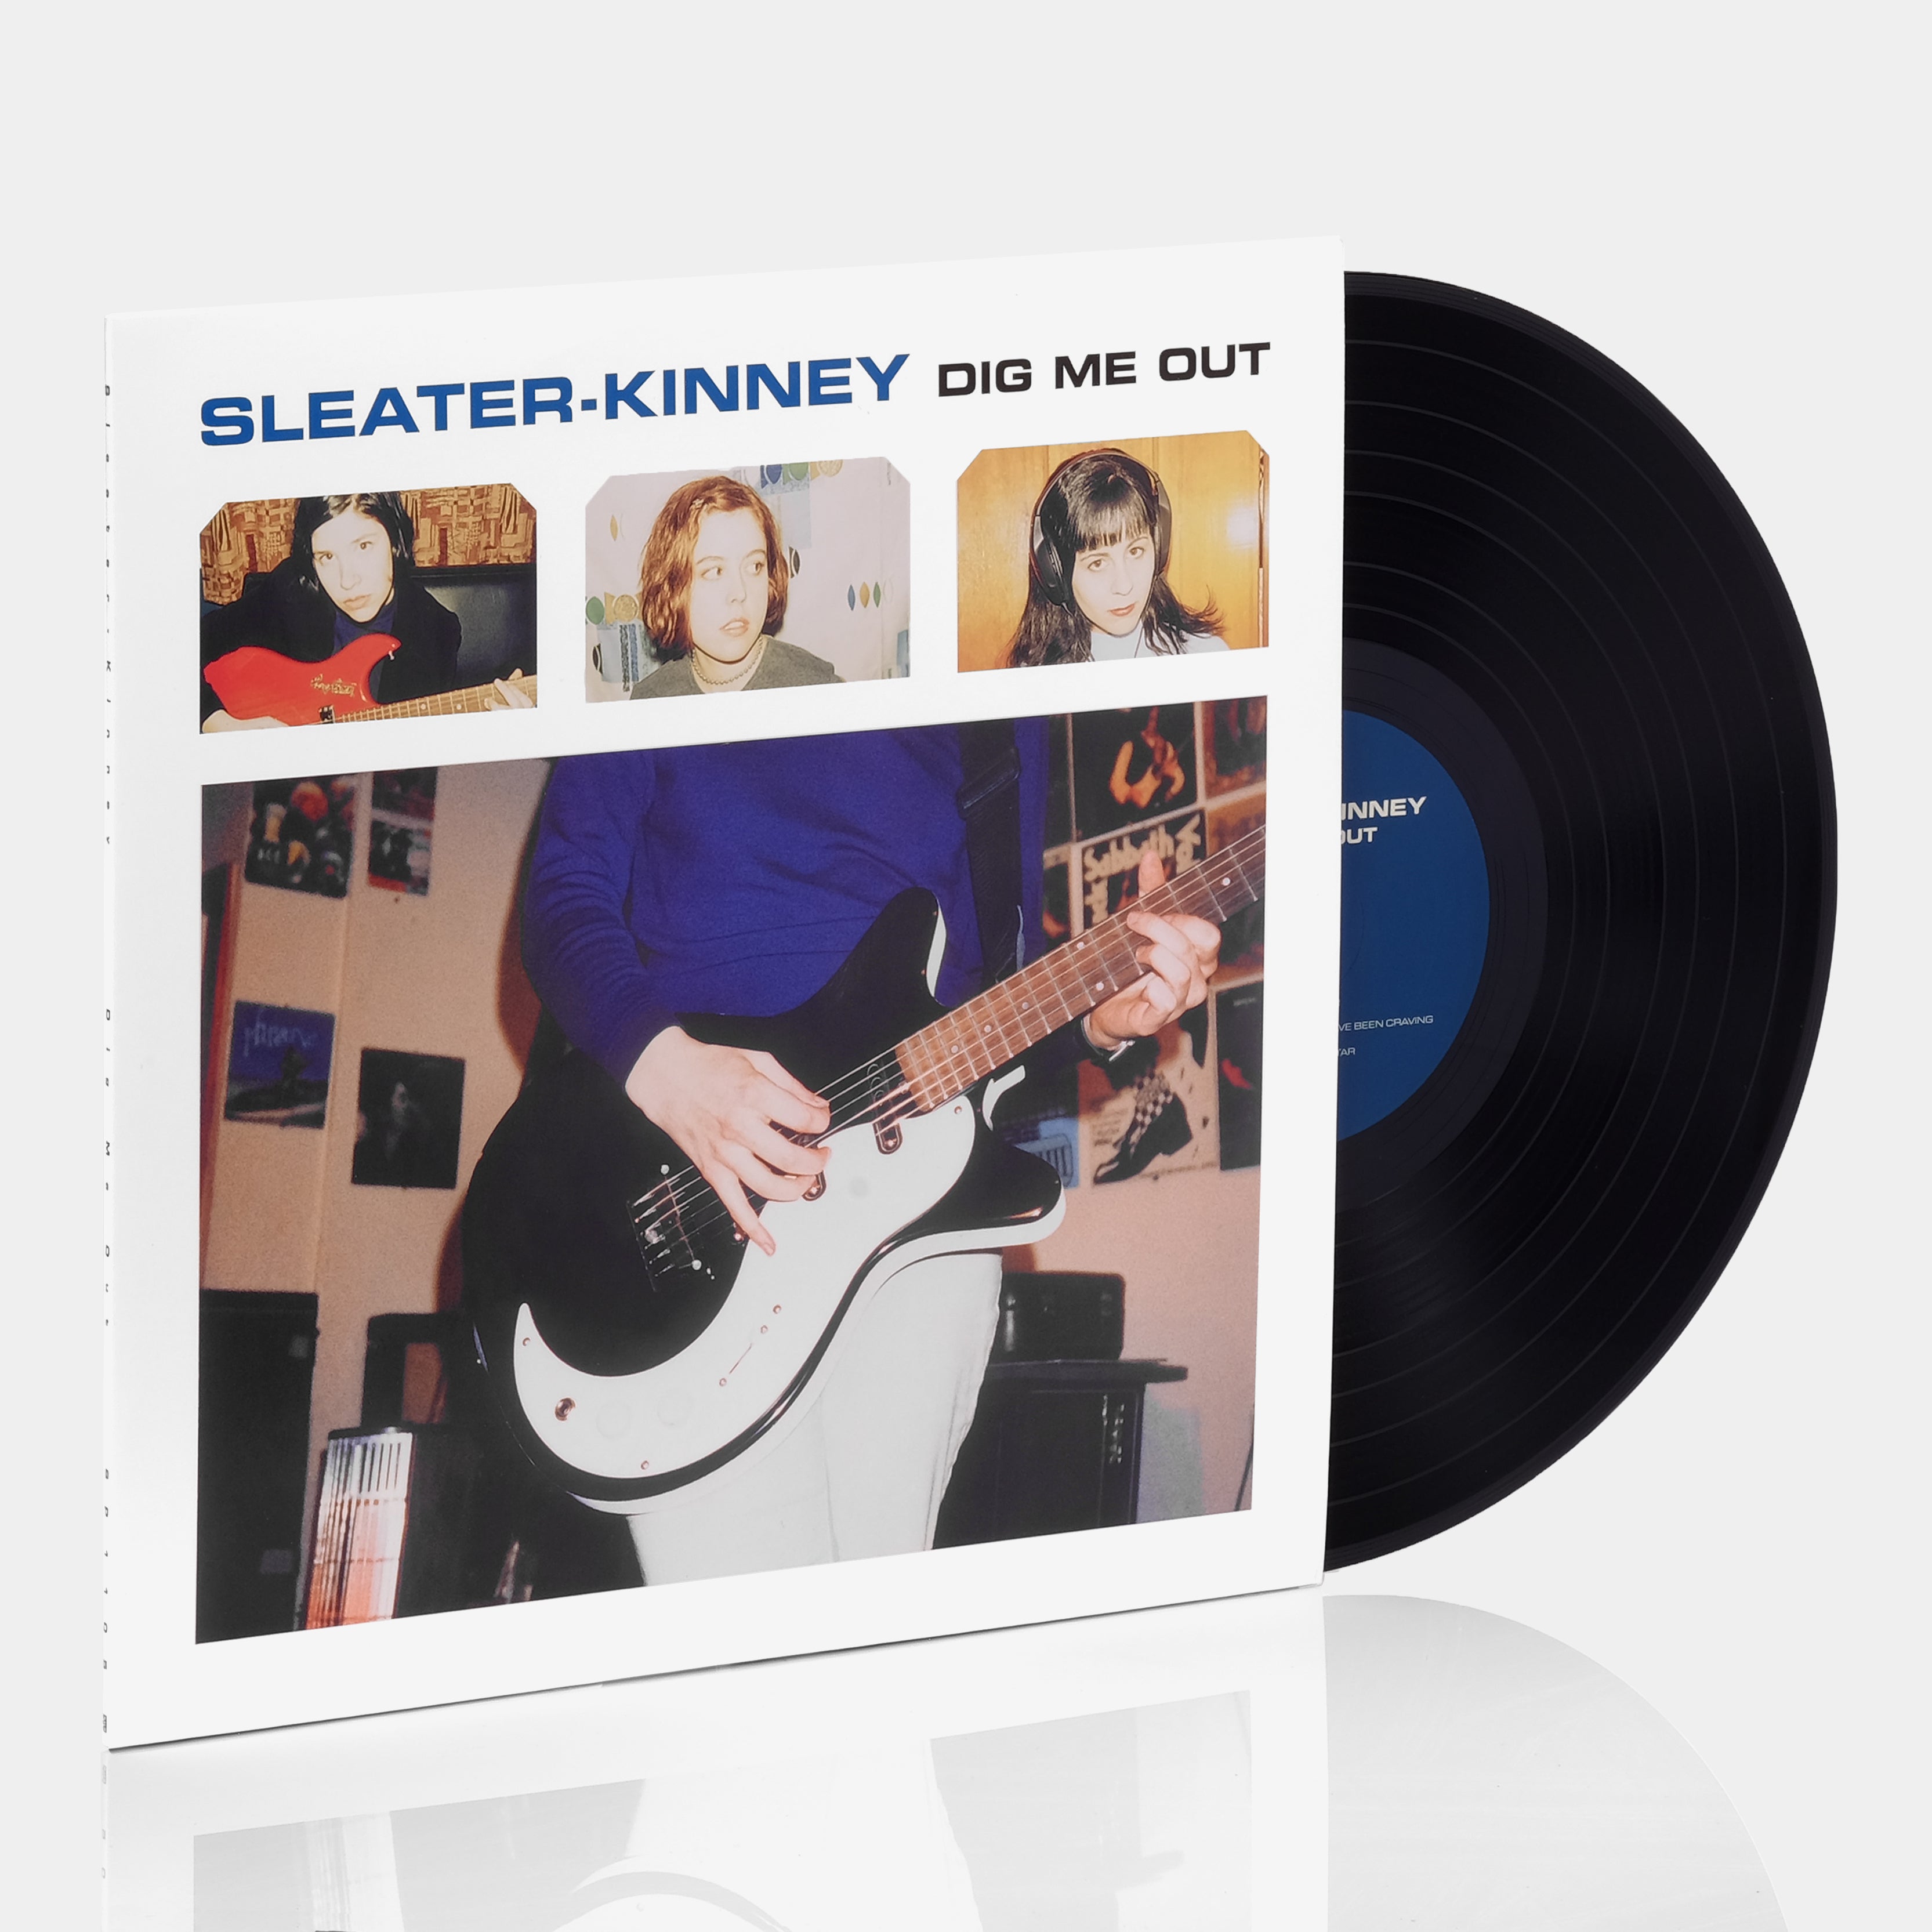 Sleater-Kinney - Dig Me Out LP Vinyl Record